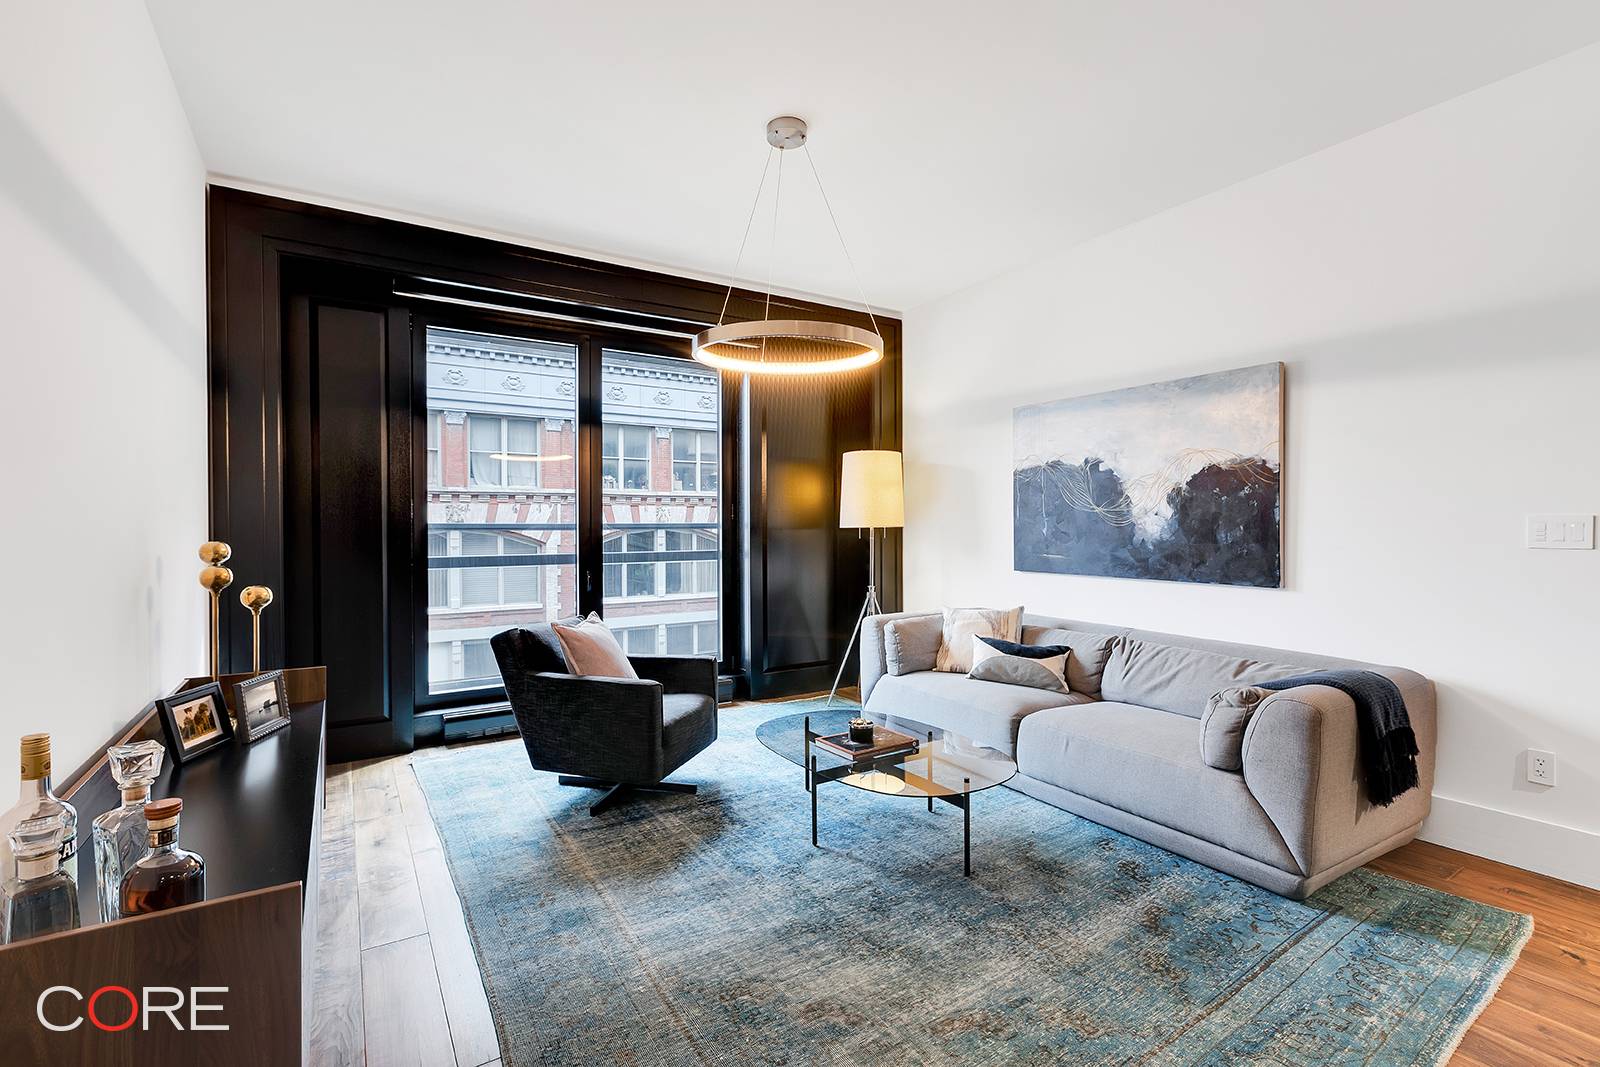 Unit 702 is a highly coveted, south facing, two bedroom residence that boasts oversized modern French doors and overlooks Chelsea s famous landmark carriage houses.